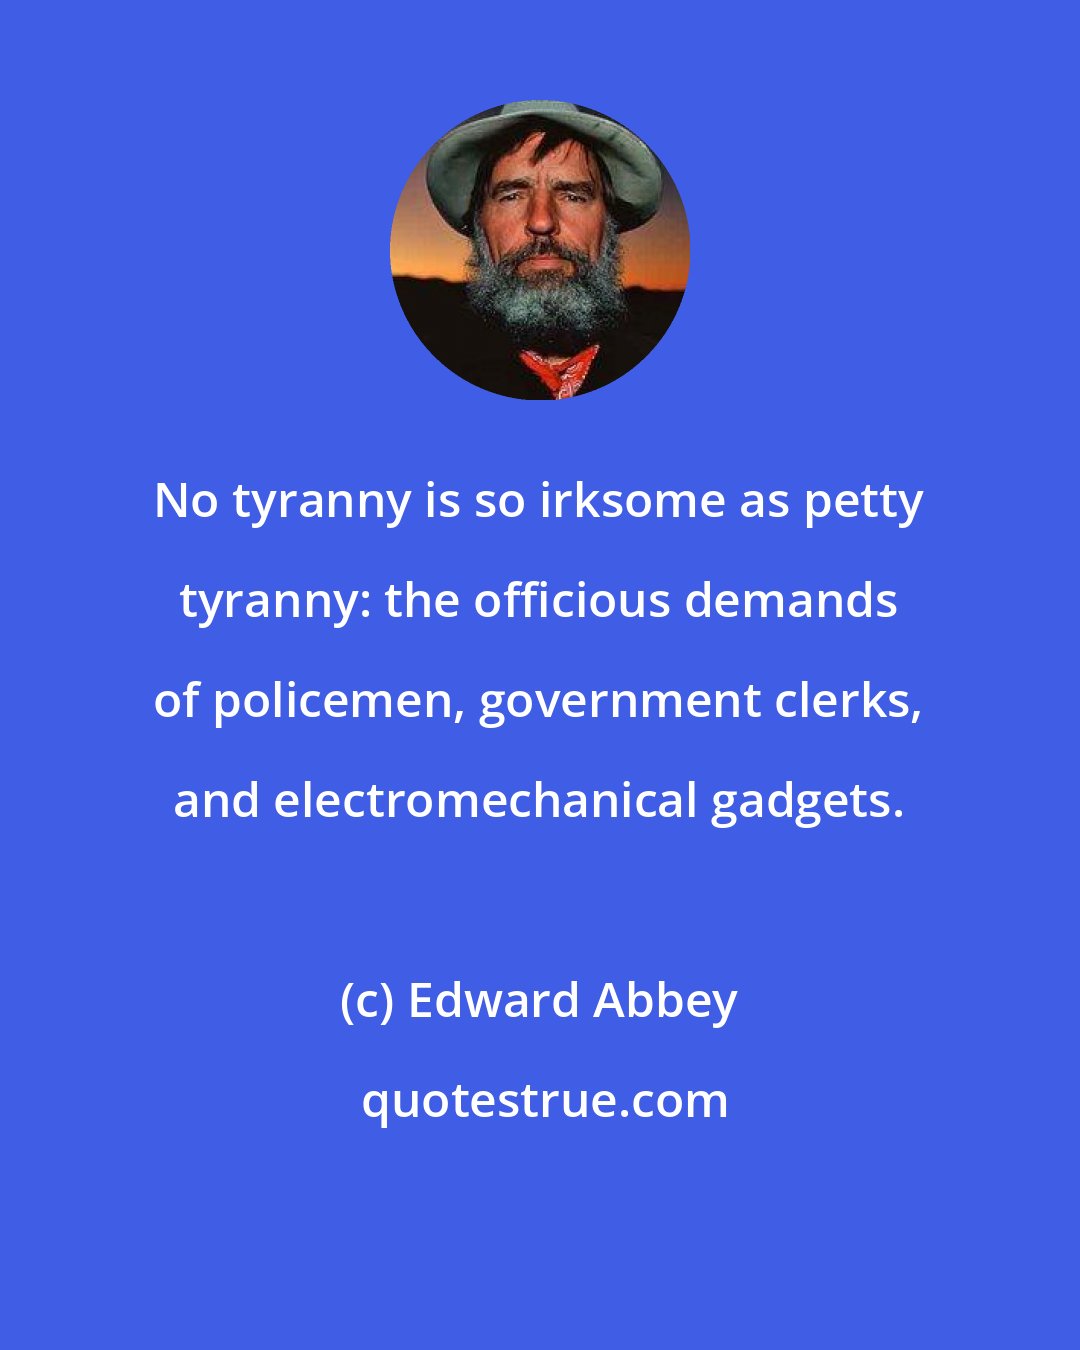 Edward Abbey: No tyranny is so irksome as petty tyranny: the officious demands of policemen, government clerks, and electromechanical gadgets.